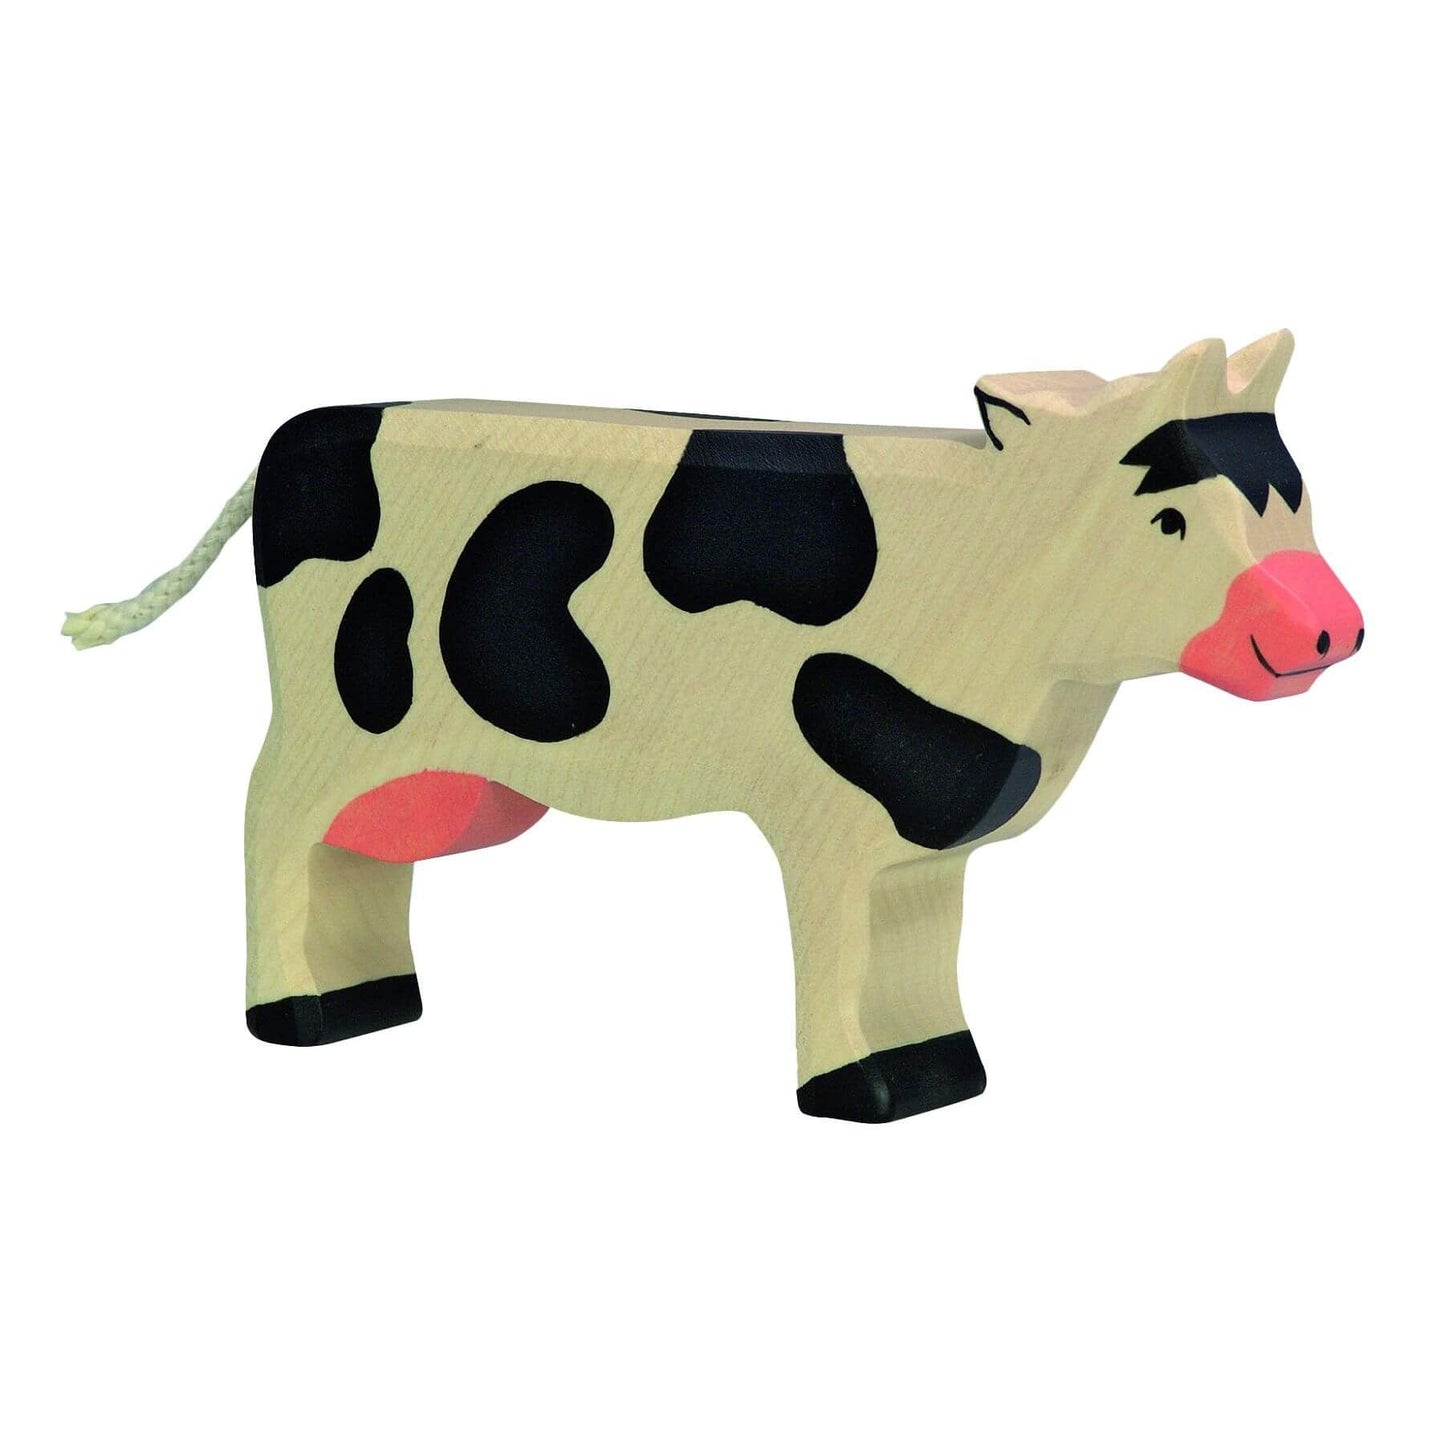 Wooden Cow by Holztiger - challenge and fun natural toys